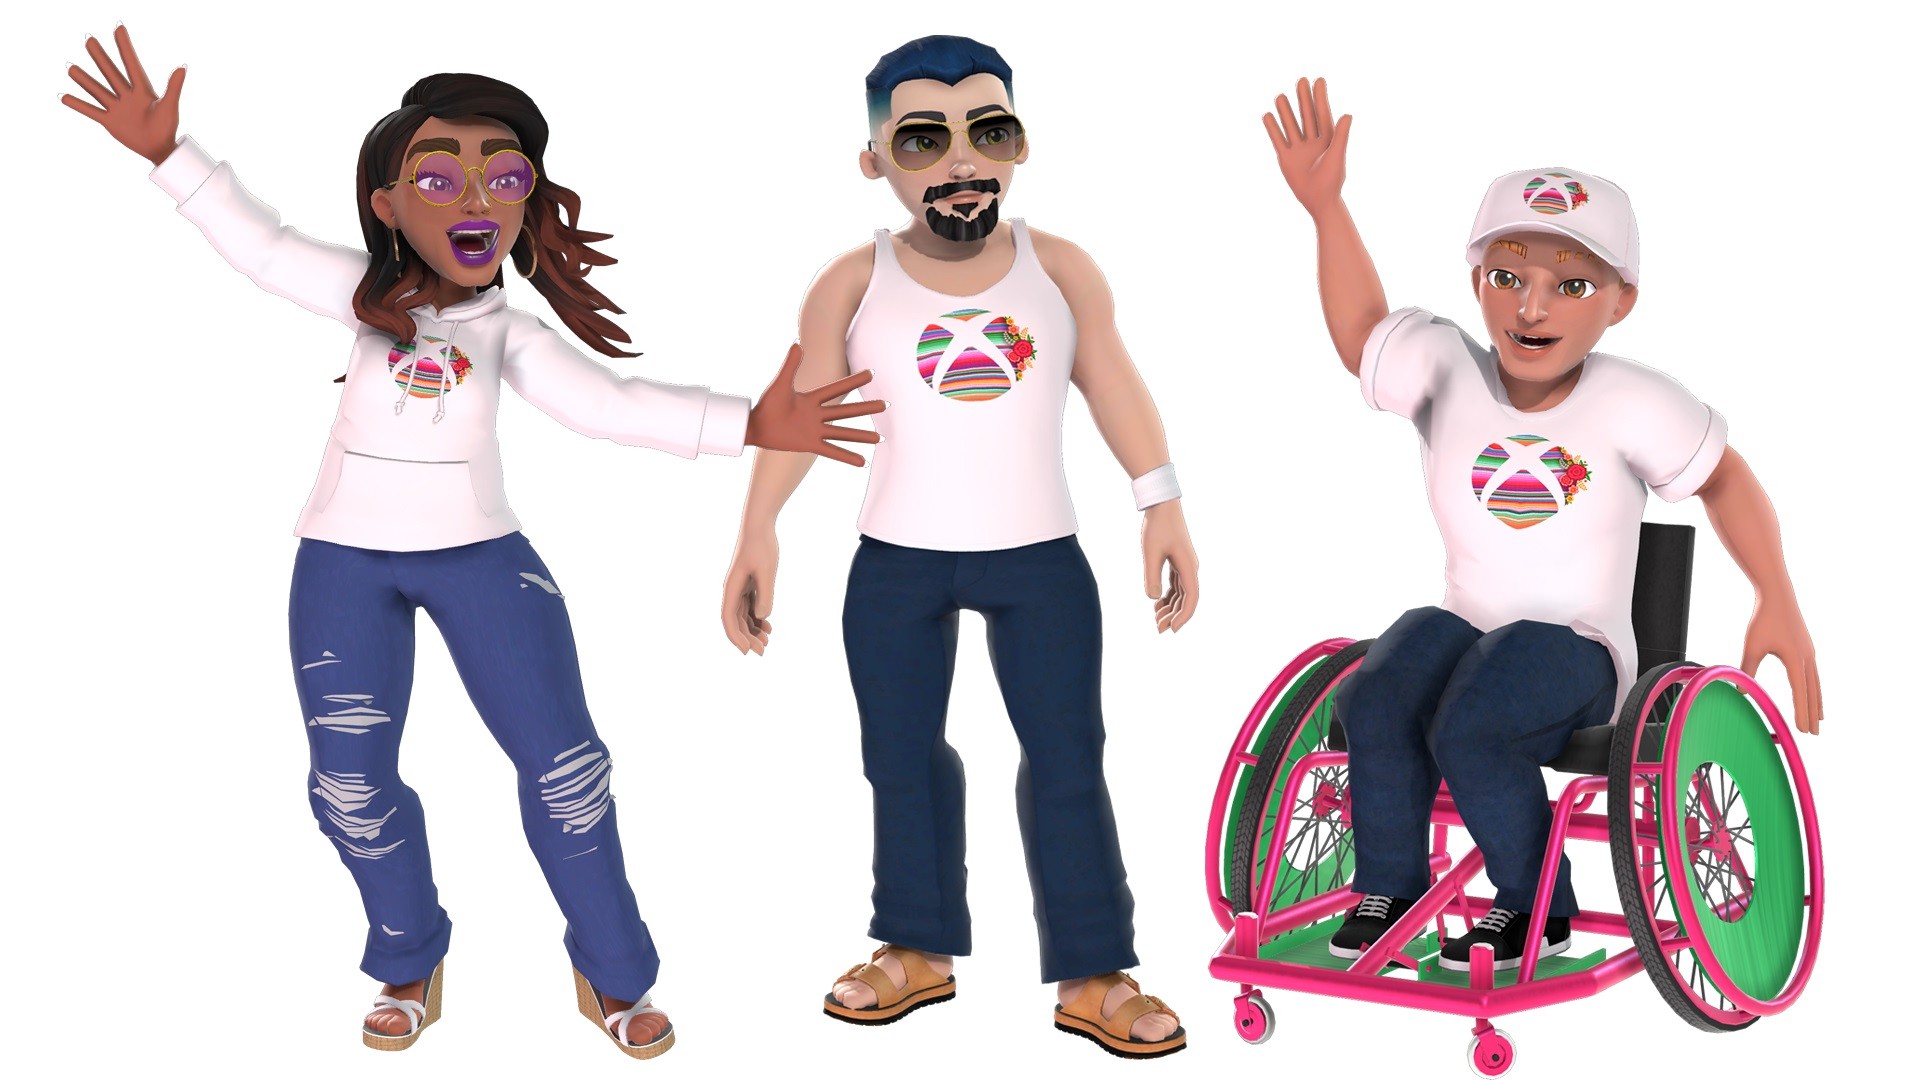 Hispanic Cultural Heritage Celebrated with Xbox Avatar